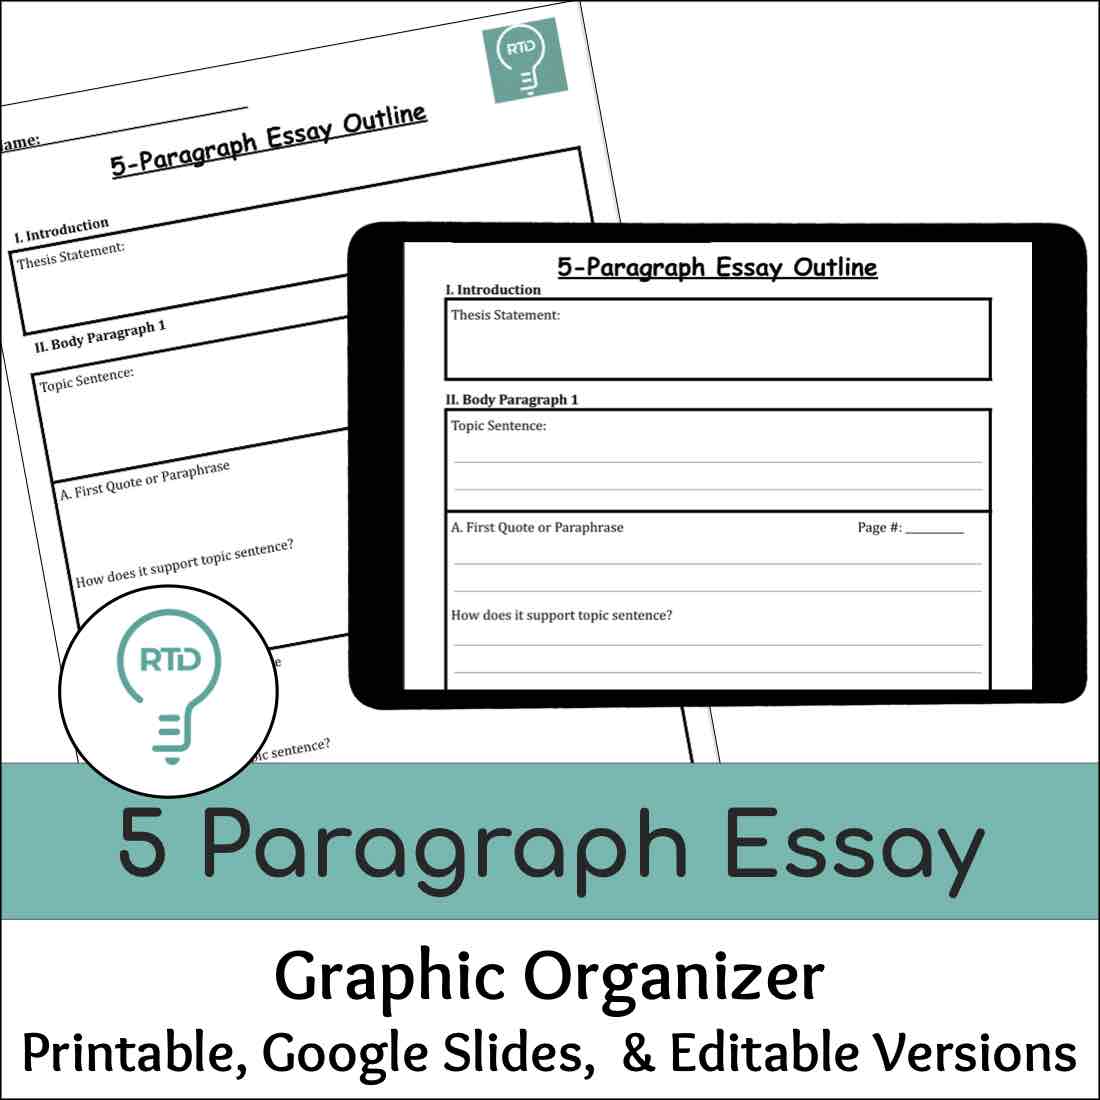 5 Paragraph Essay Writing Graphic Organizer | Print and Digital Options